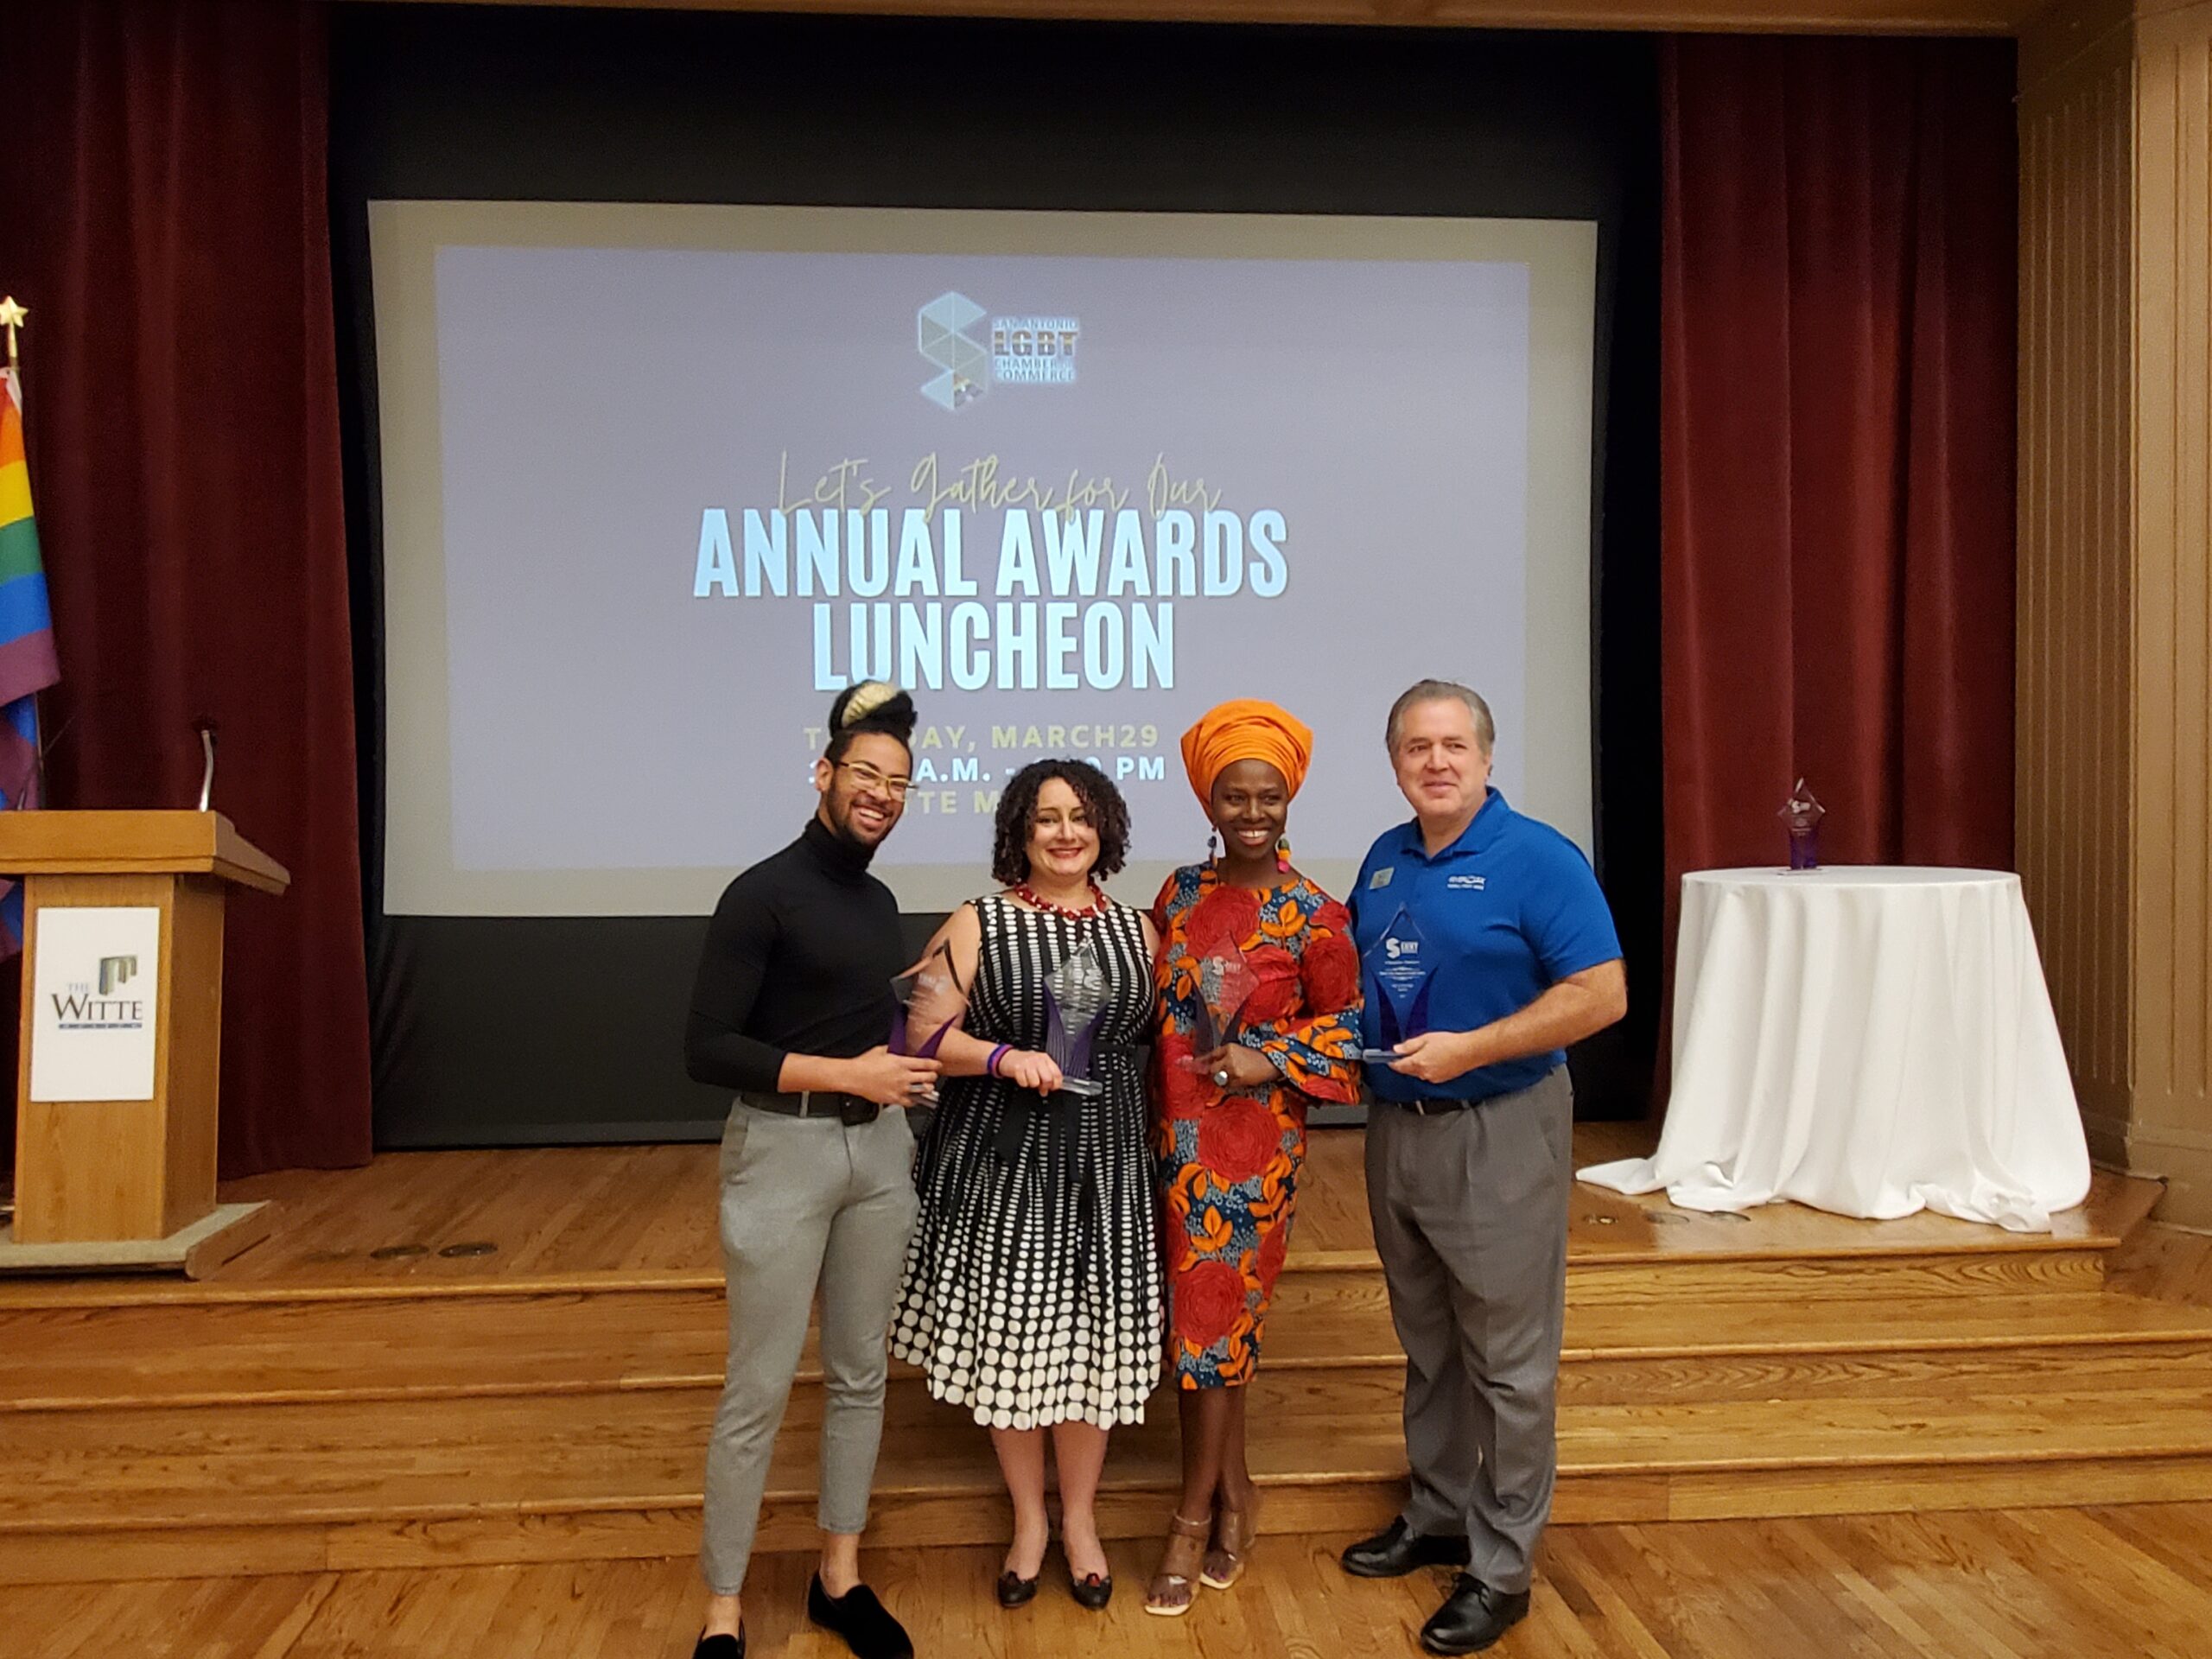 Dr Ansbro Receives LGBT Chamber of Commerce Award